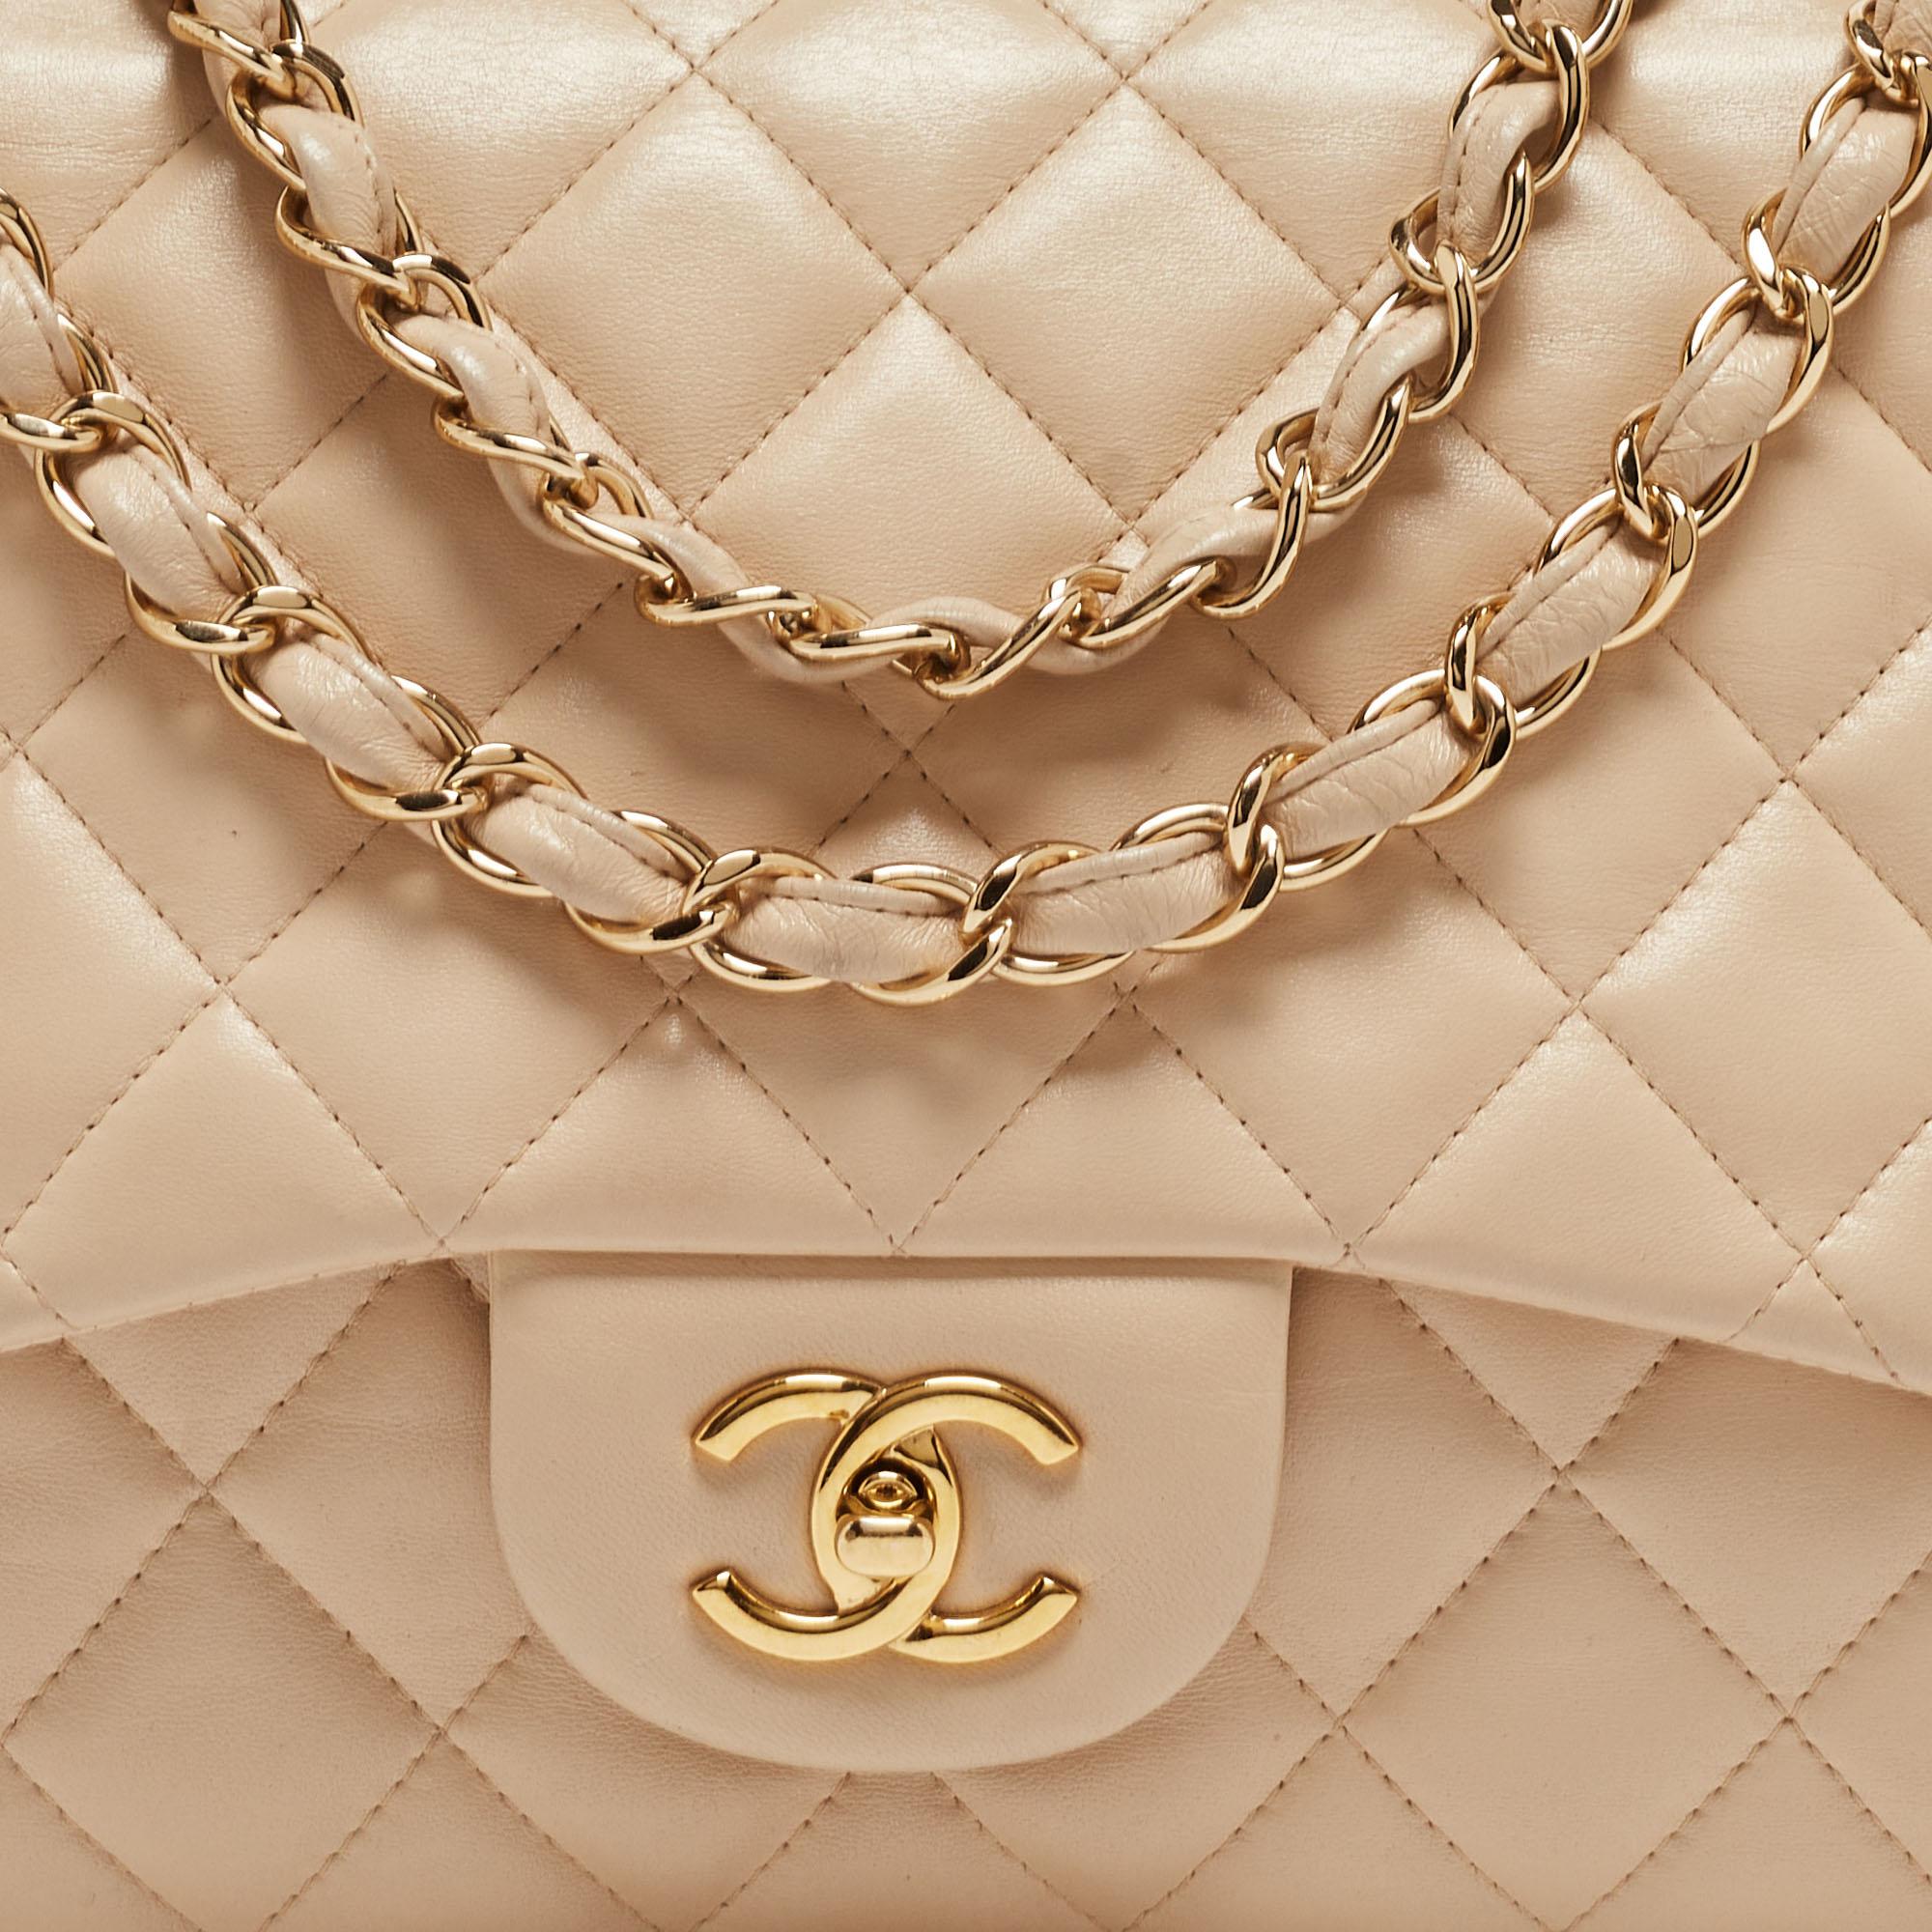 Chanel Beige Quilted Leather Jumbo Classic Single Flap Bag 14